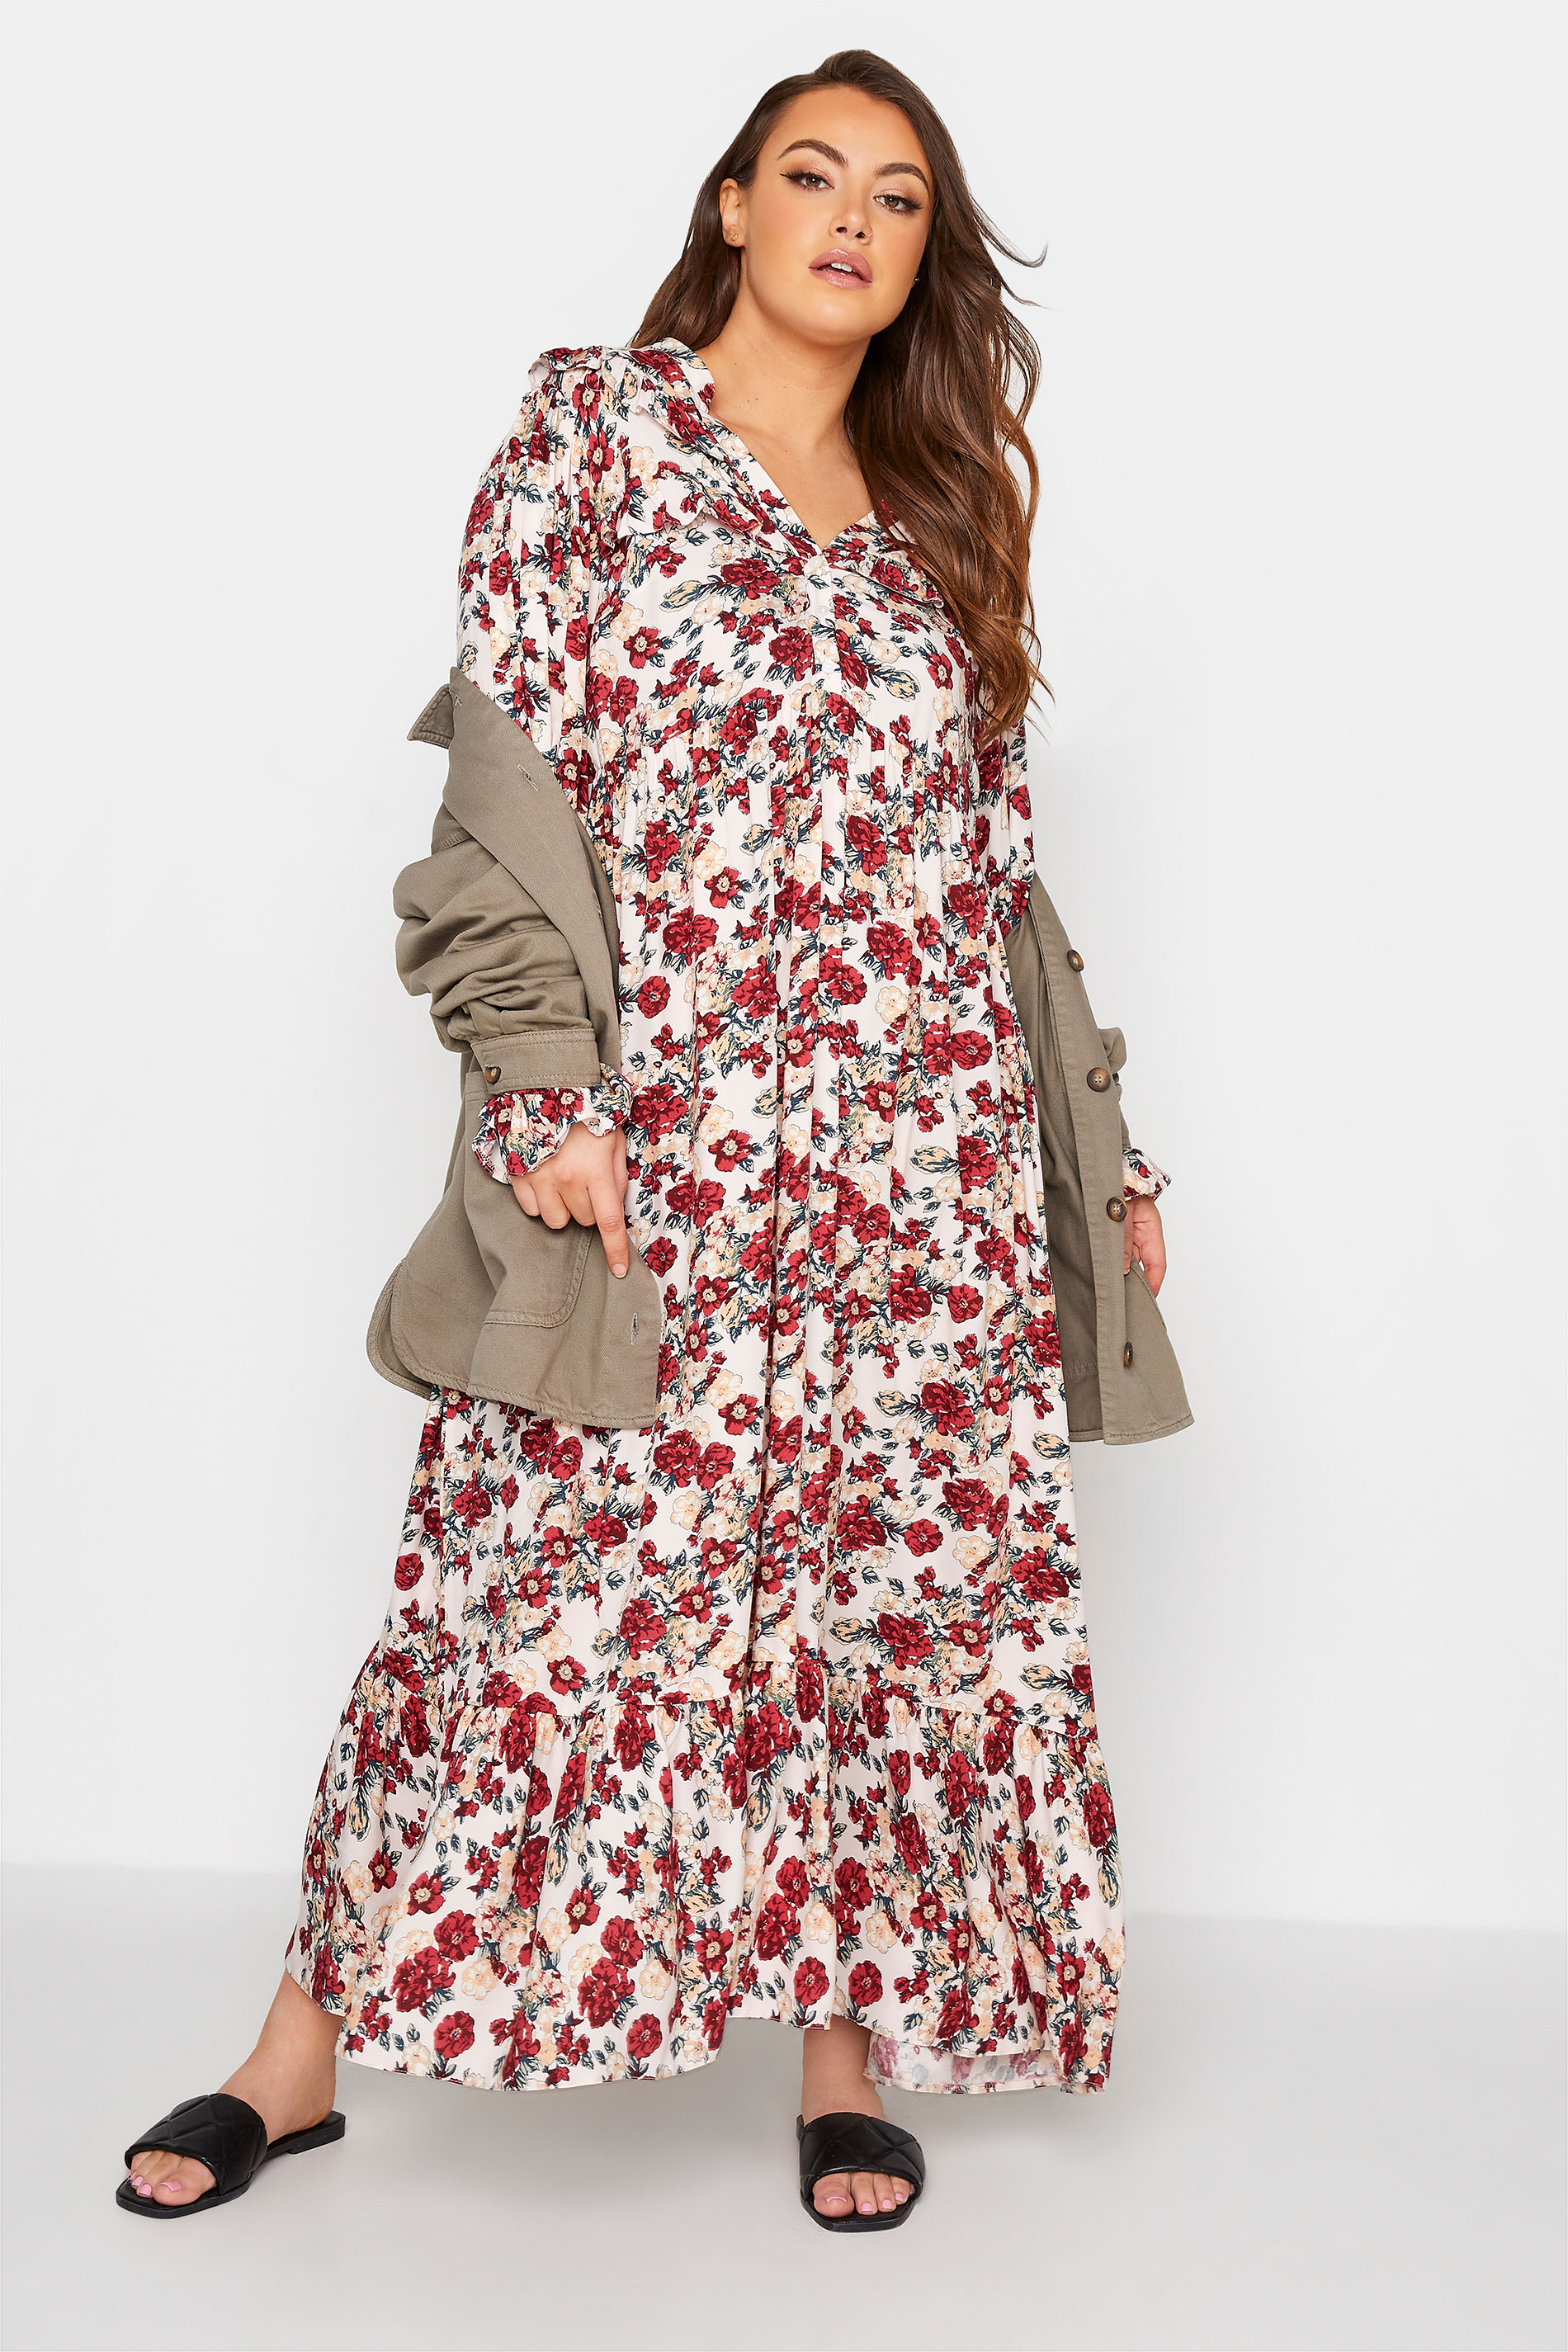 Robes Grande Taille Grande taille  Robes Longues | THE LIMITED EDIT - Robe Beige Manches Longues Floral Rouge - WY56393